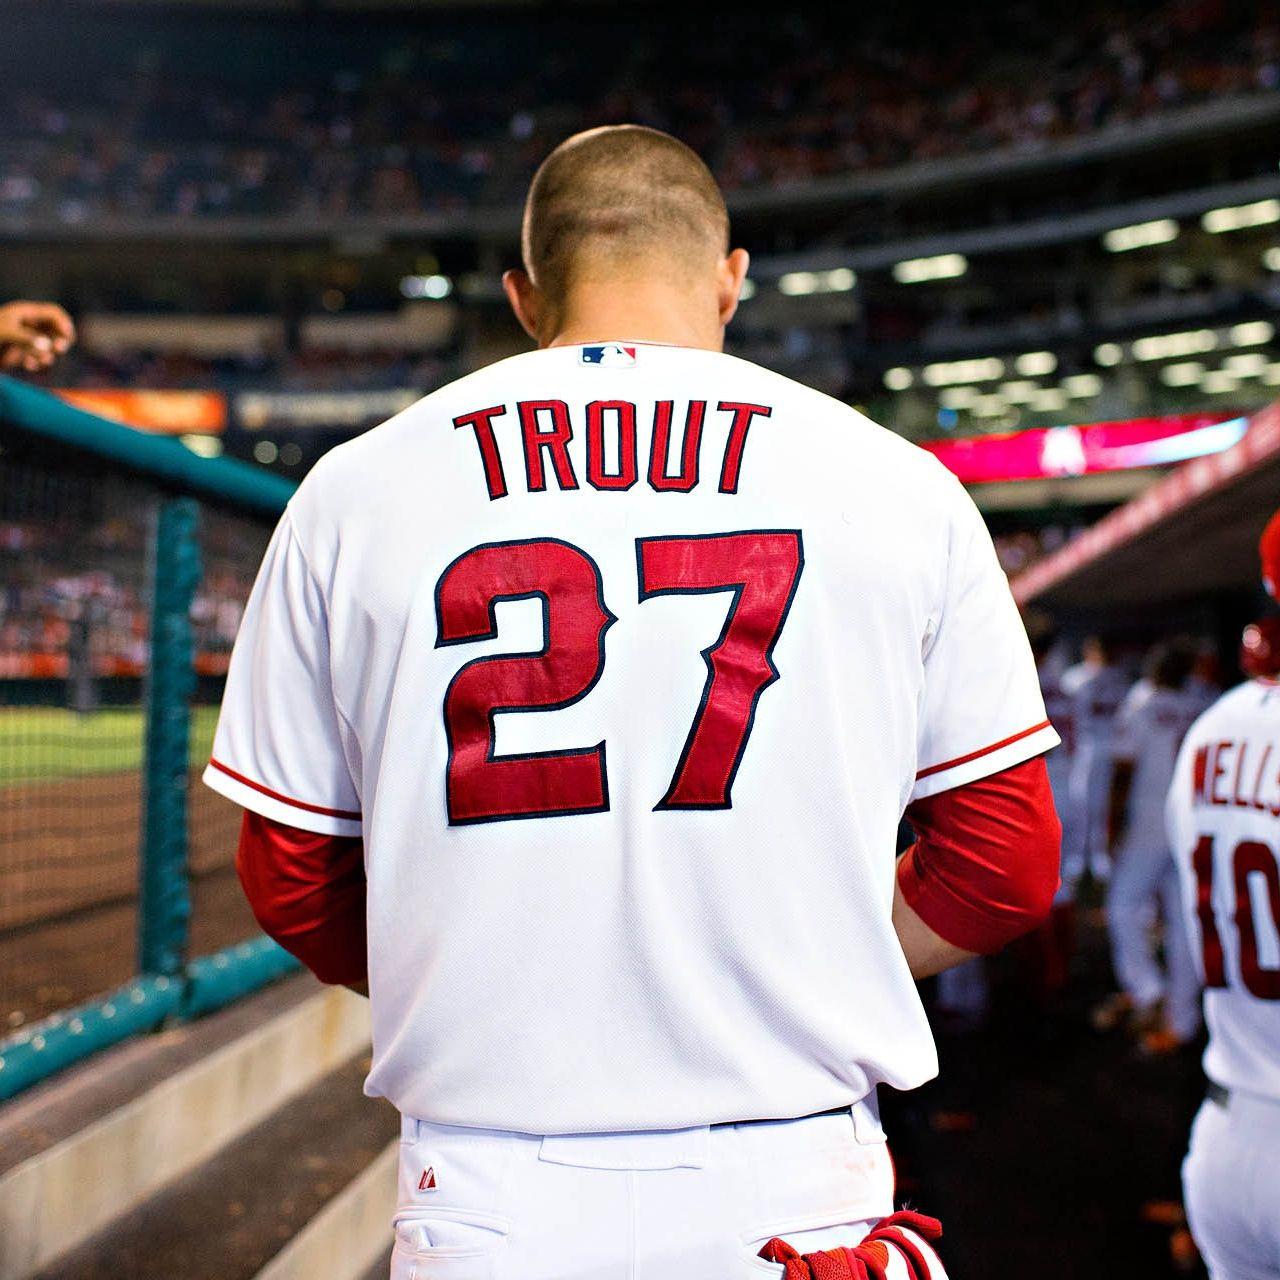 Mike Trout Iphone Wallpaper  Mlb wallpaper, Mike trout, Baseball